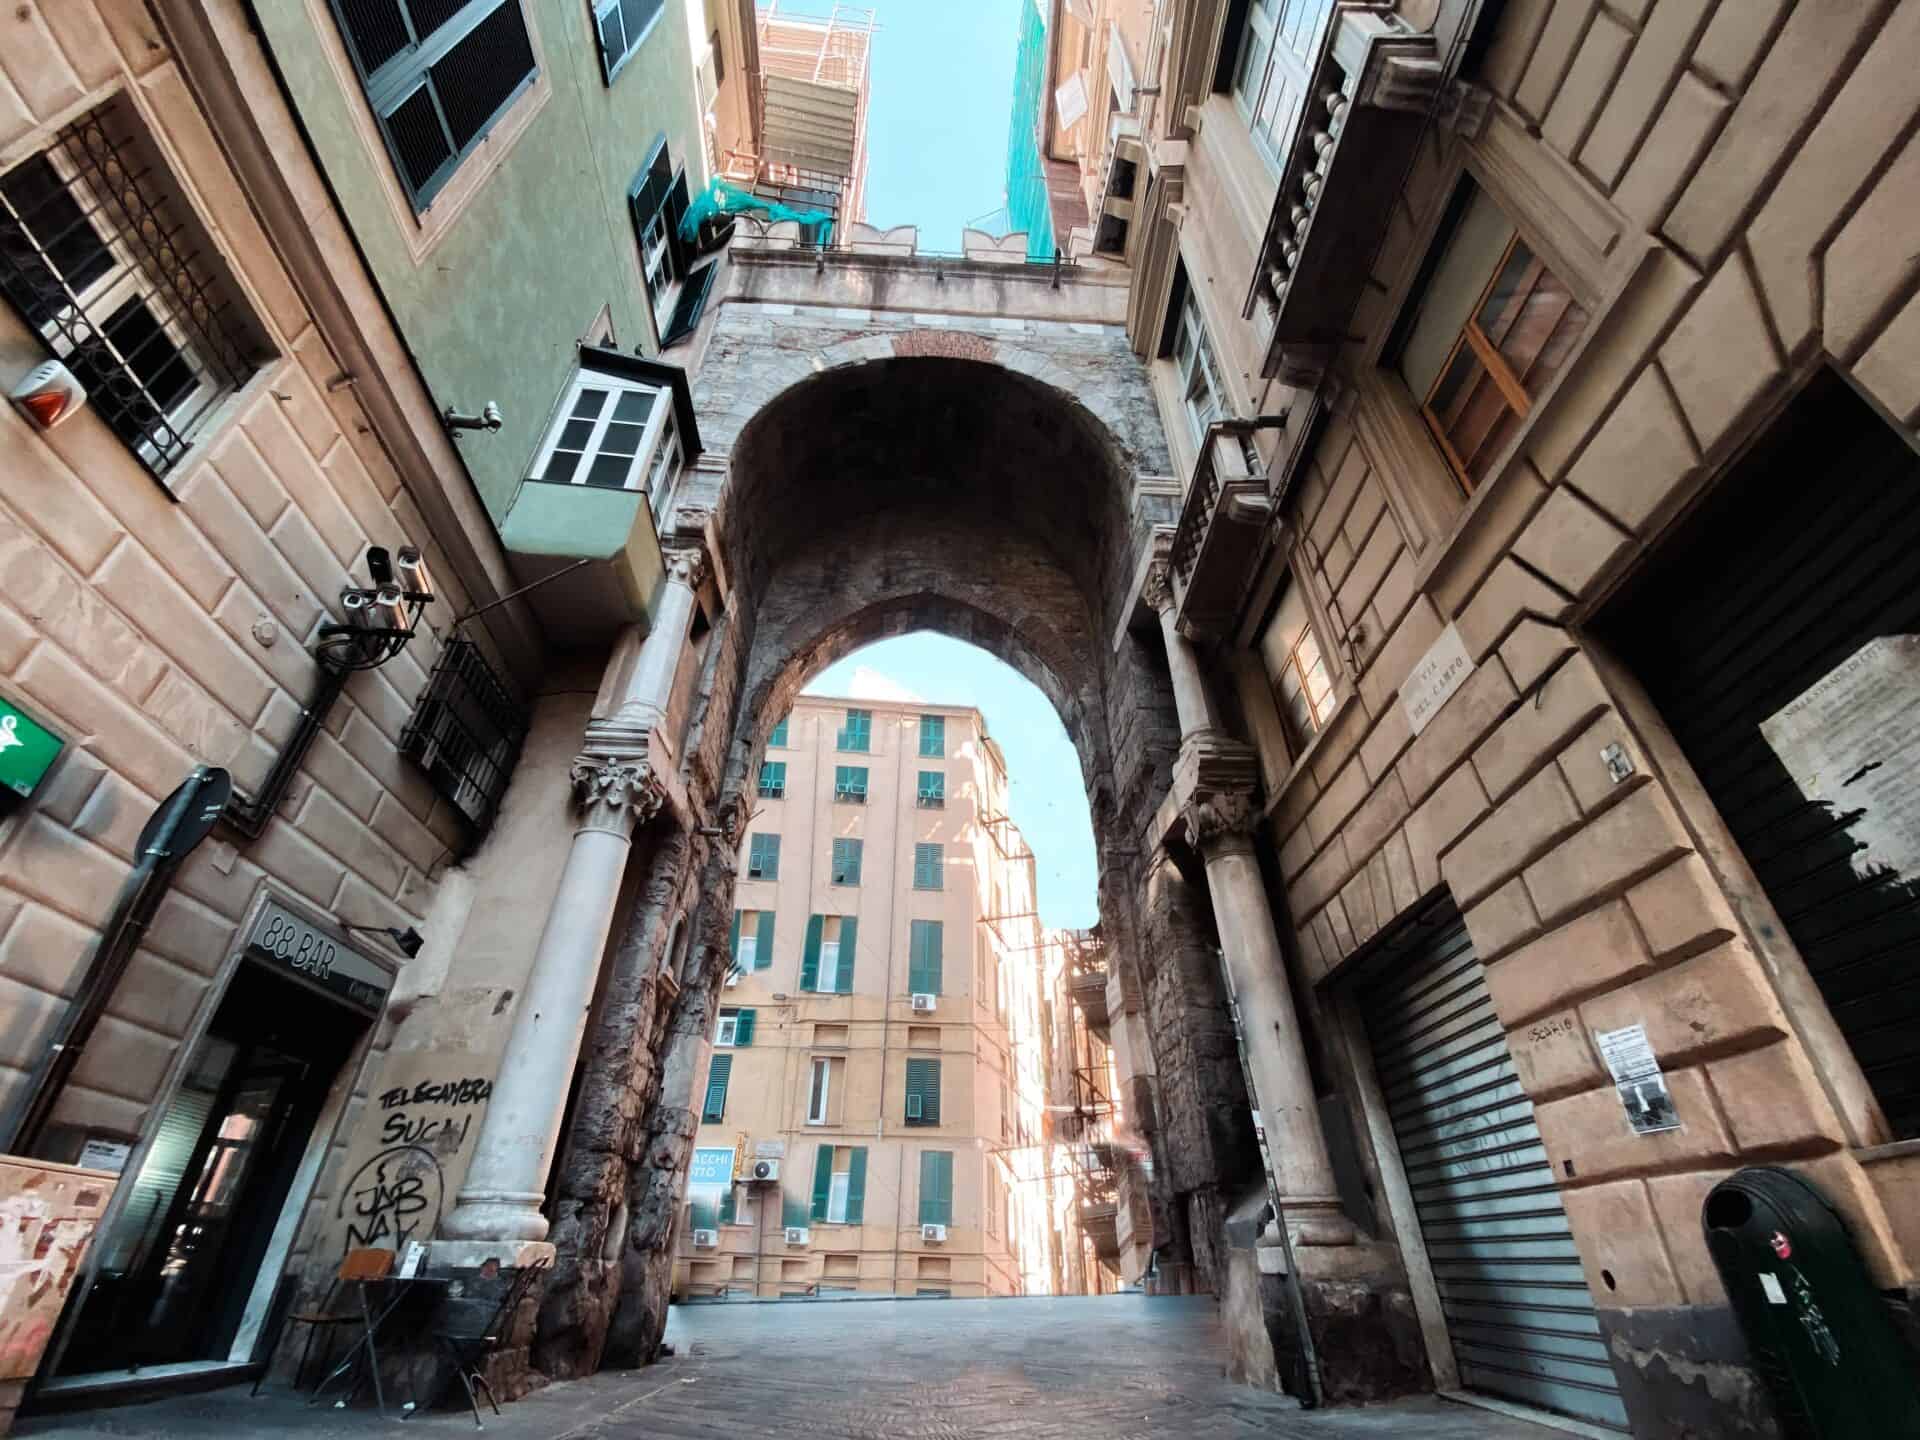 Large roman archway gate in genoa Italy